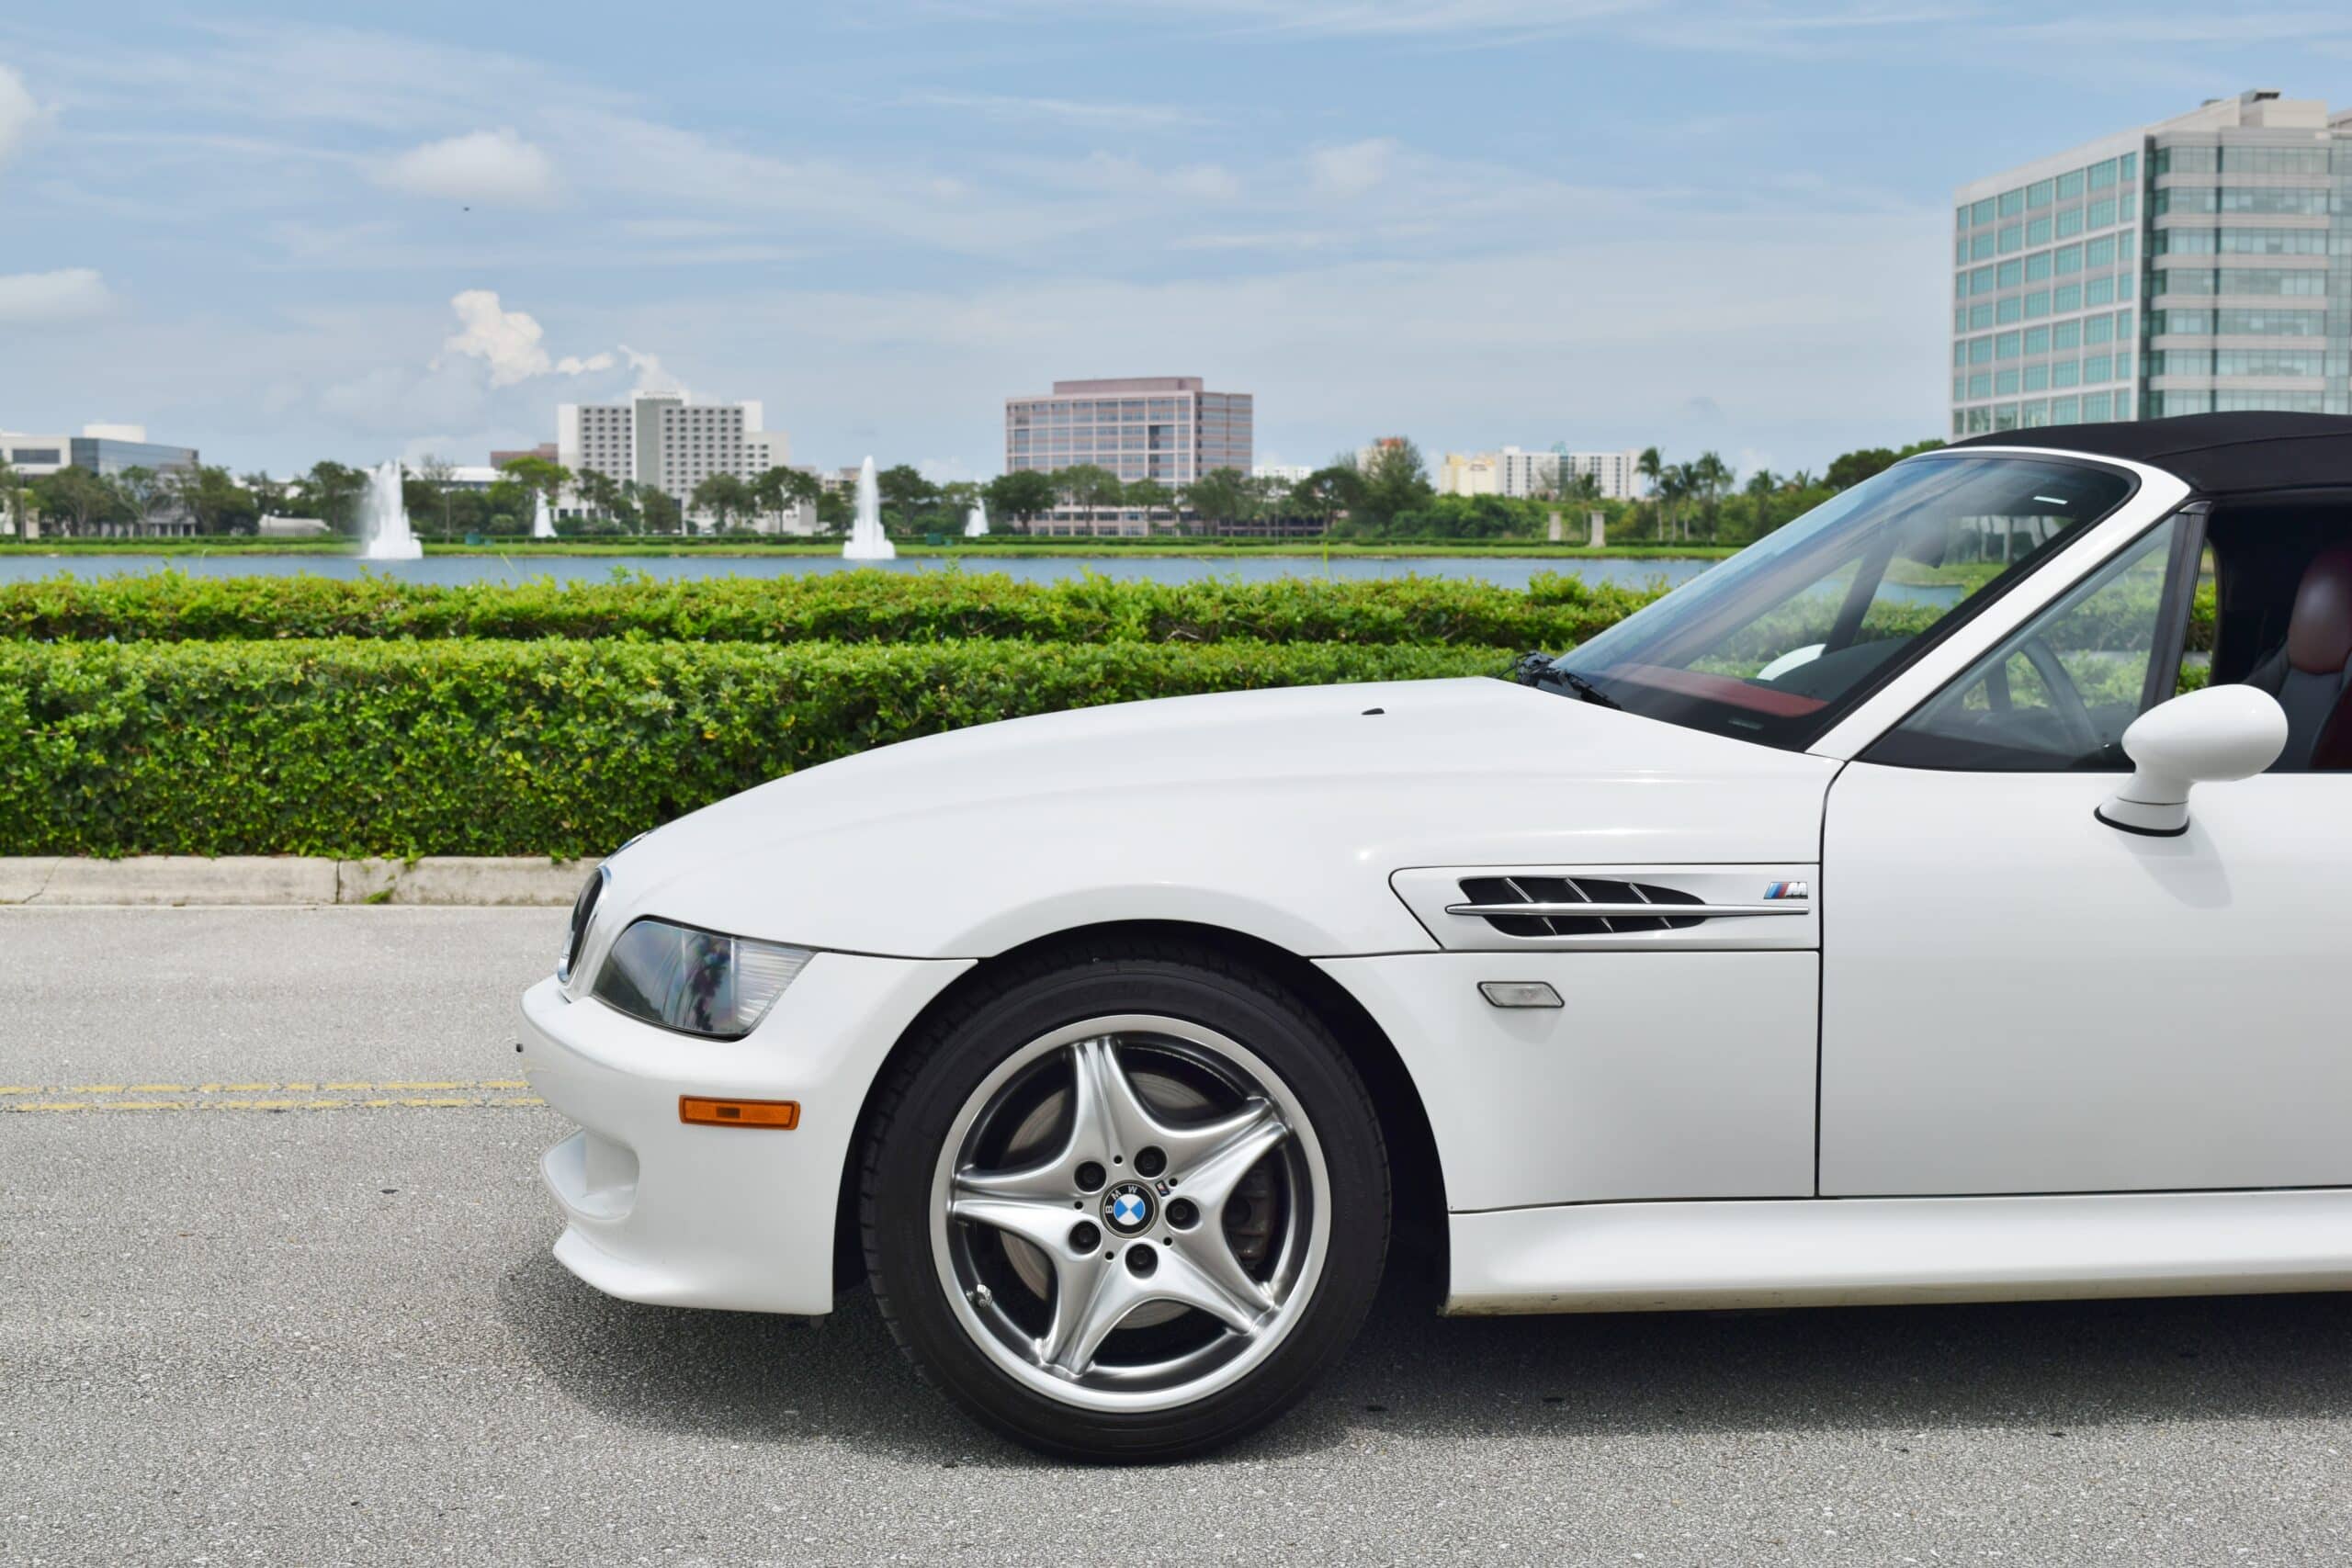 2002 BMW M Roadster & Coupe Last year Z3M Roadster 2 Owner- Only 40K miles – Rare White/Red color combination- 4 Keys-Books/Manuals